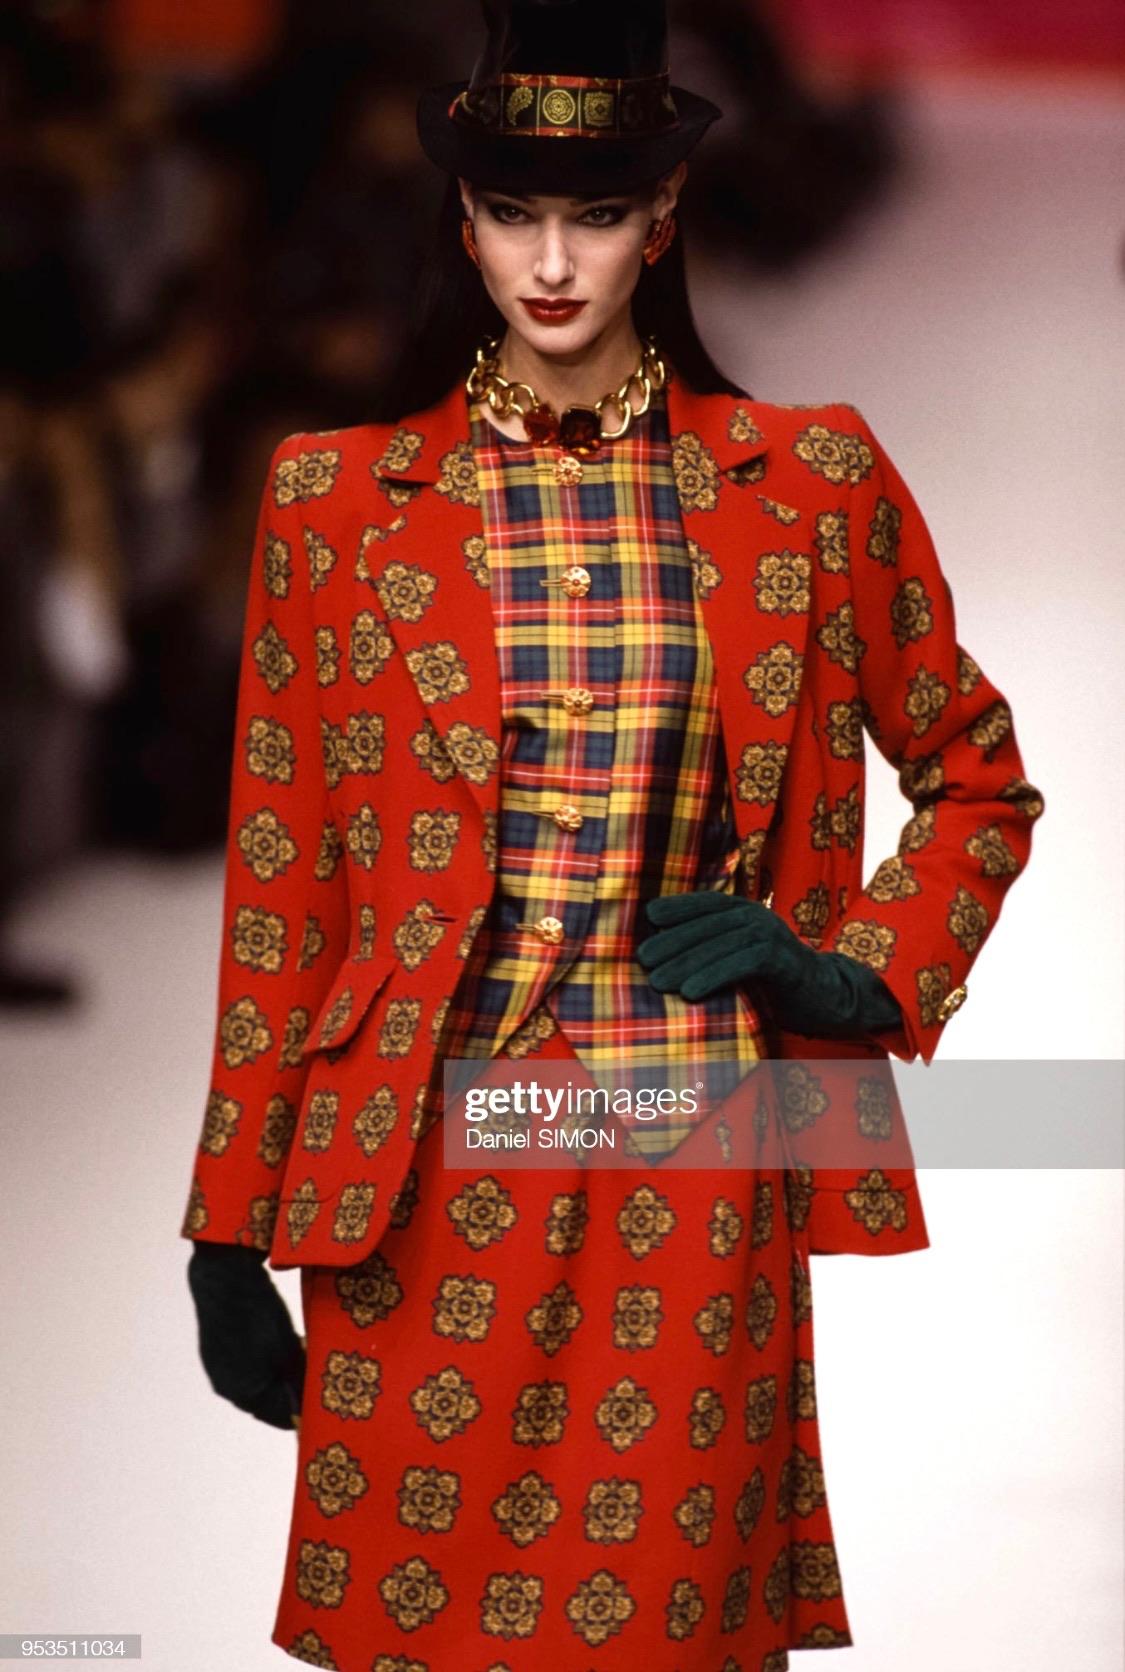 Presenting a fabulous plaid Yves Saint Laurent Rive Gauche blouse and matching scarf. From the Fall/Winter 1995 collection, this top and scarf debuted on the season's runway. This fabulous top features a crew neckline, angular hem, poof sleeves, and